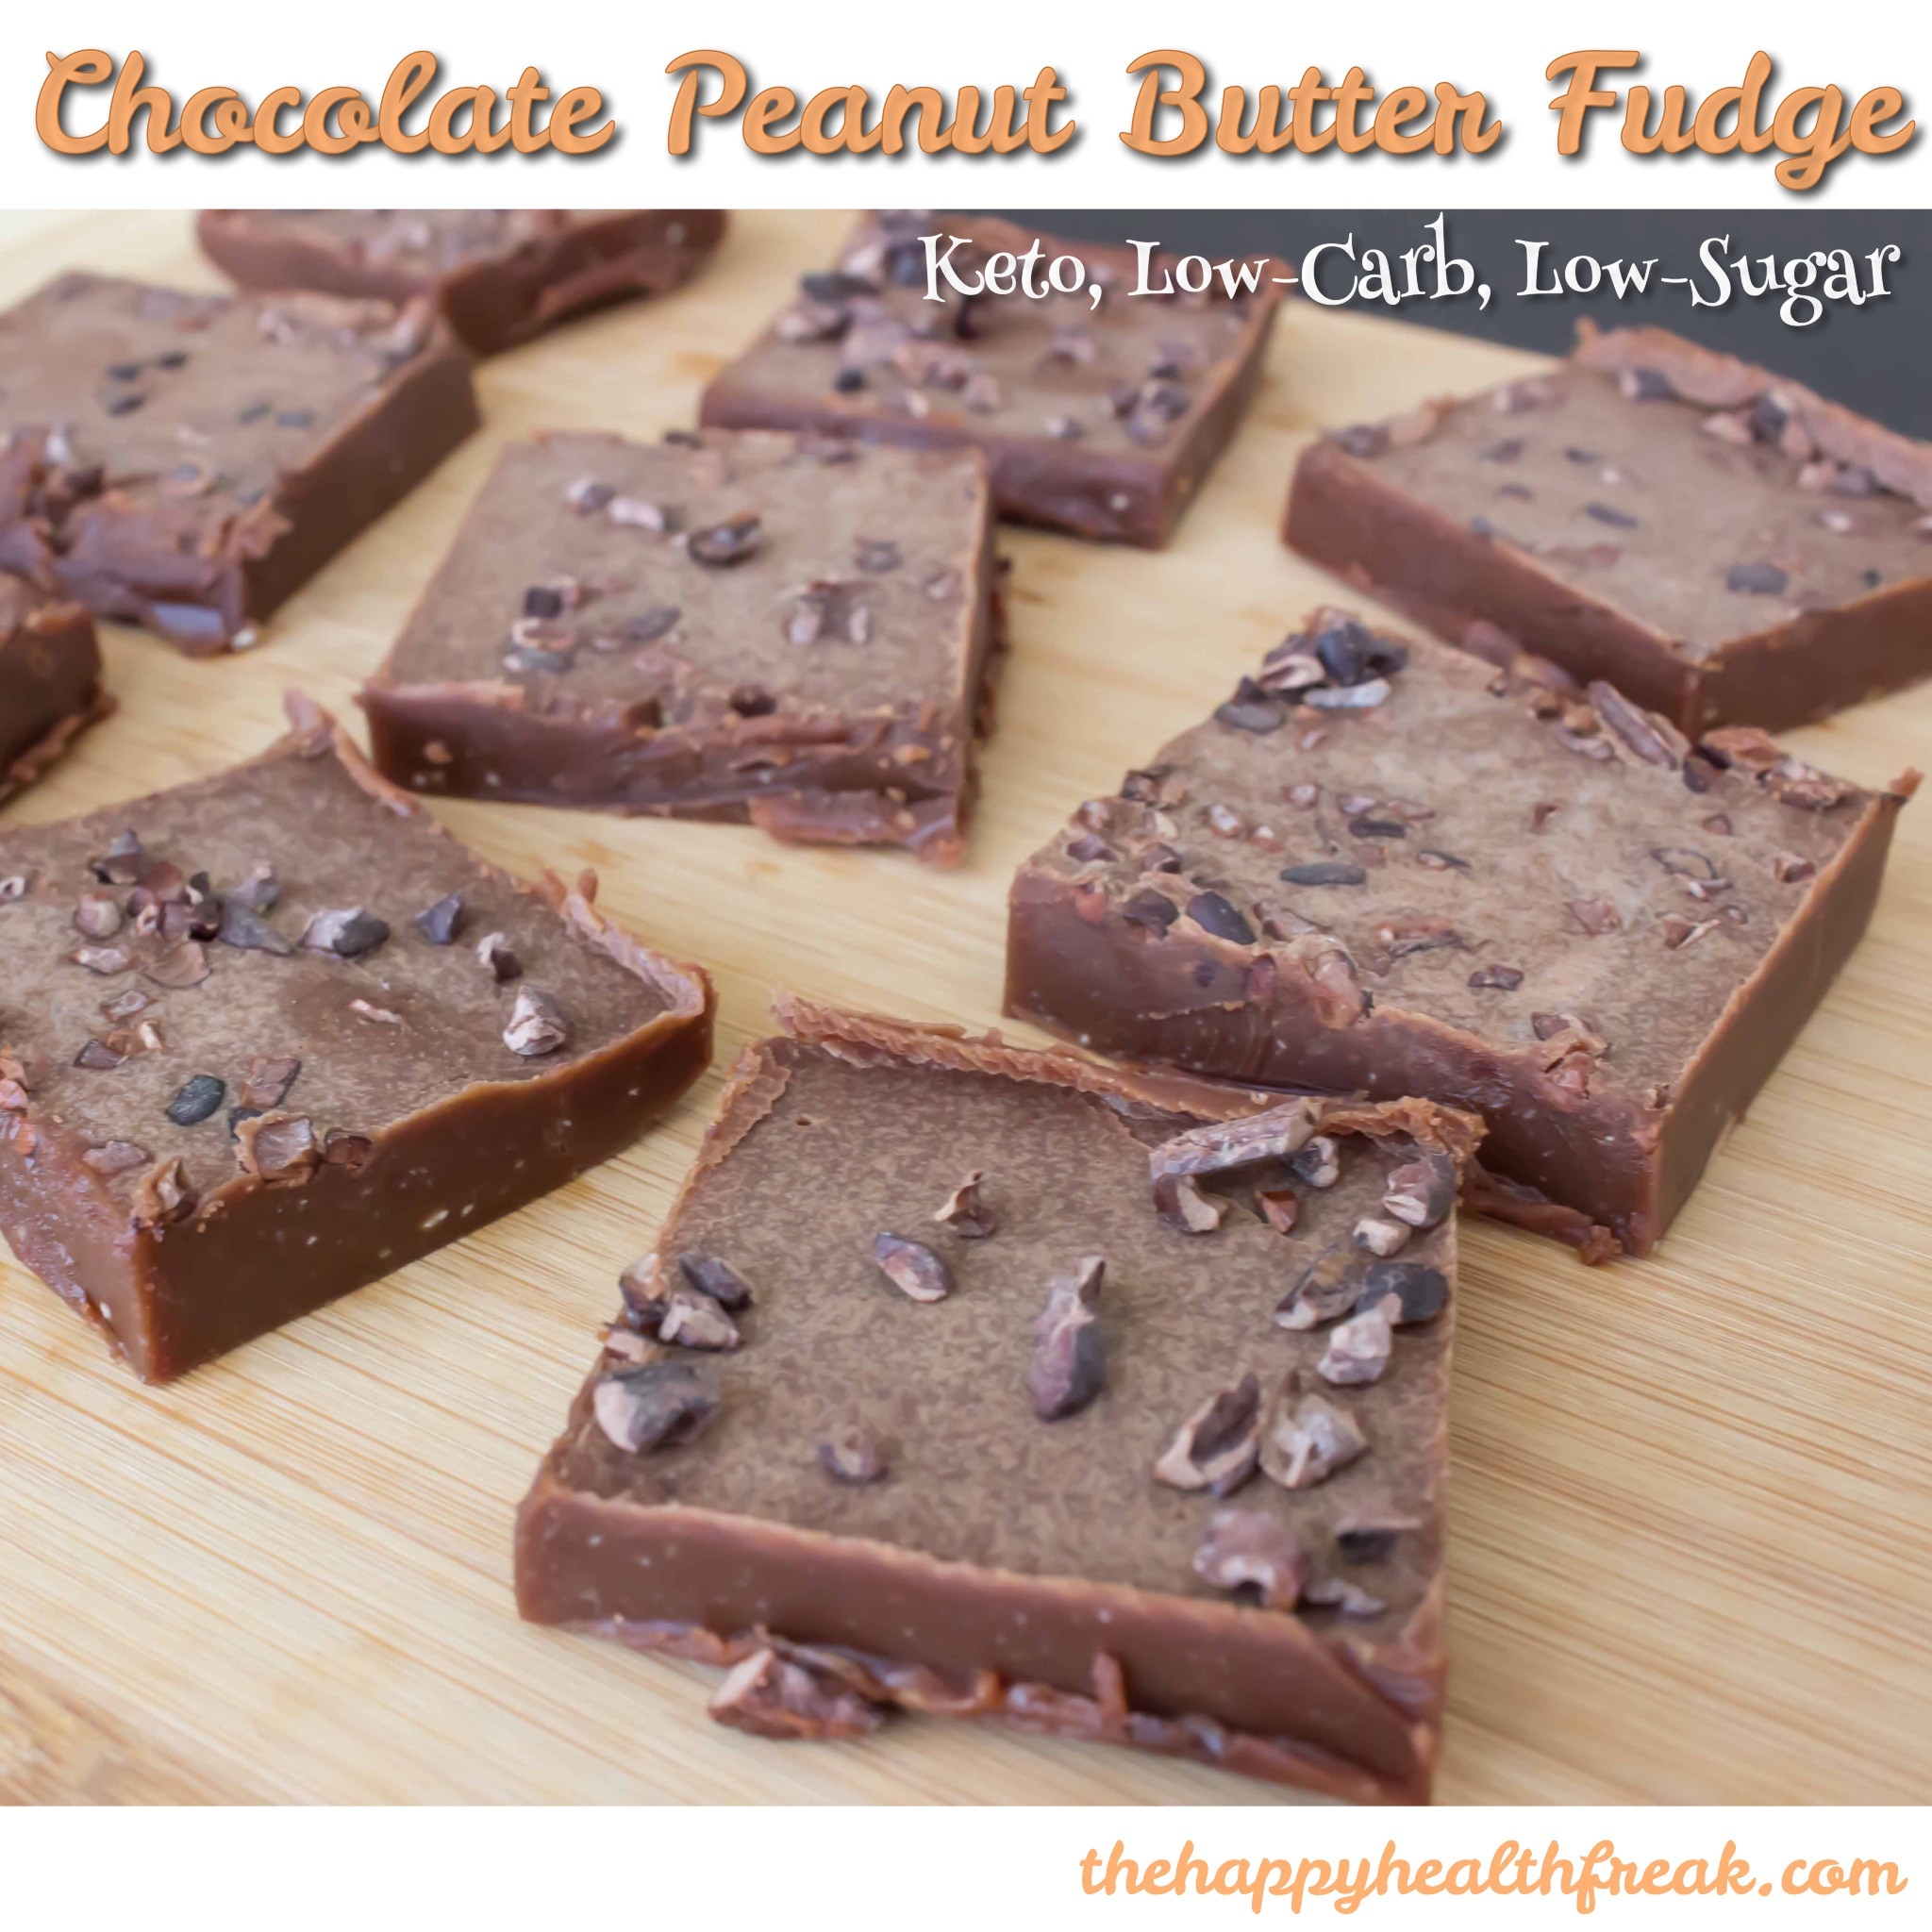 Powdered Peanut Butter Recipes Low Carb
 Chocolate Peanut Butter Fudge Keto Low Sugar Low Carb